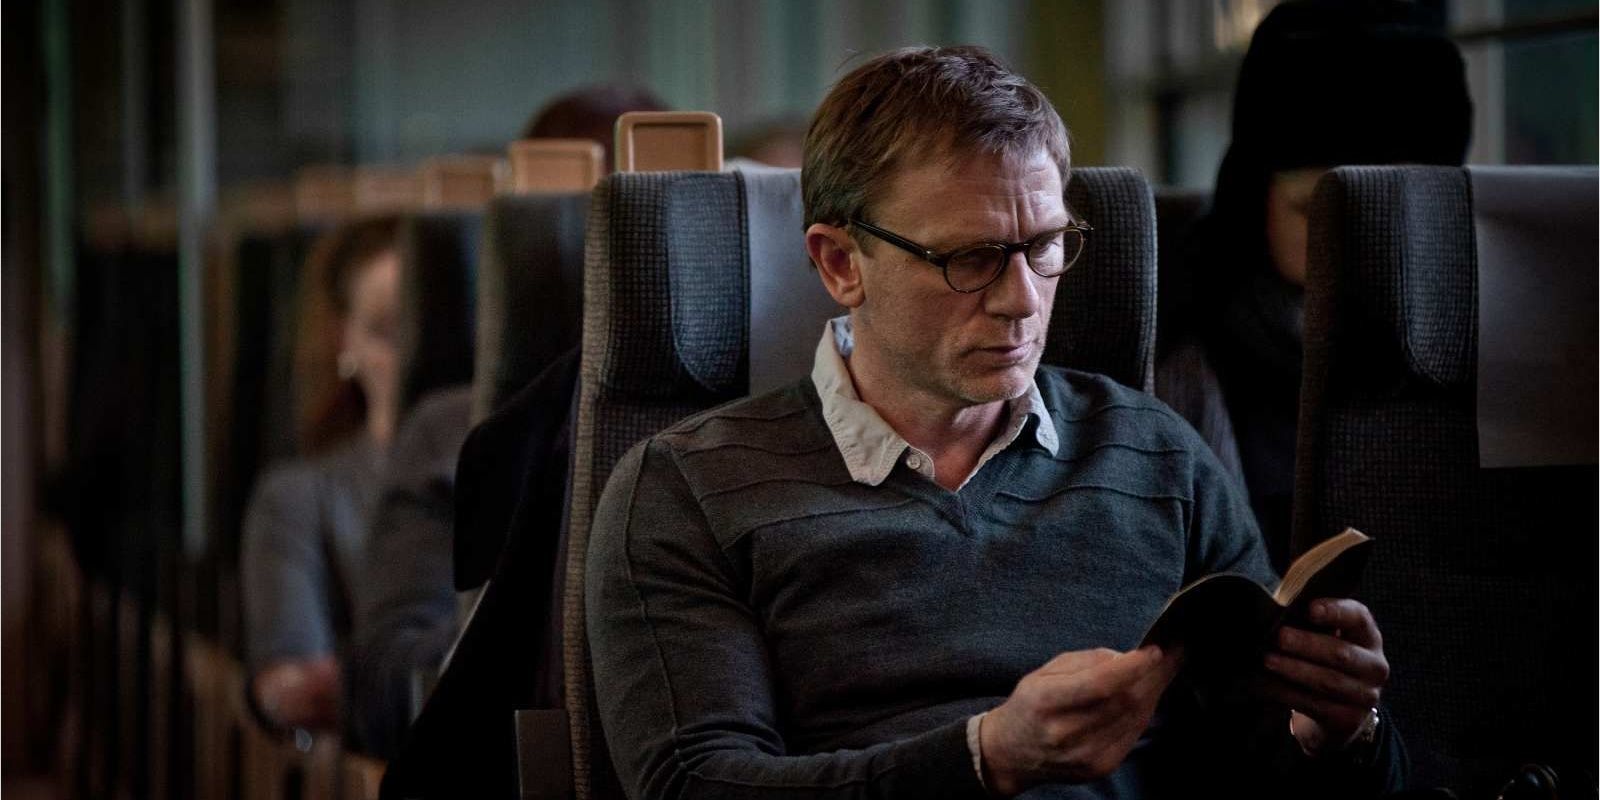 Mikael reads a book in The Girl with the Dragon Tattoo